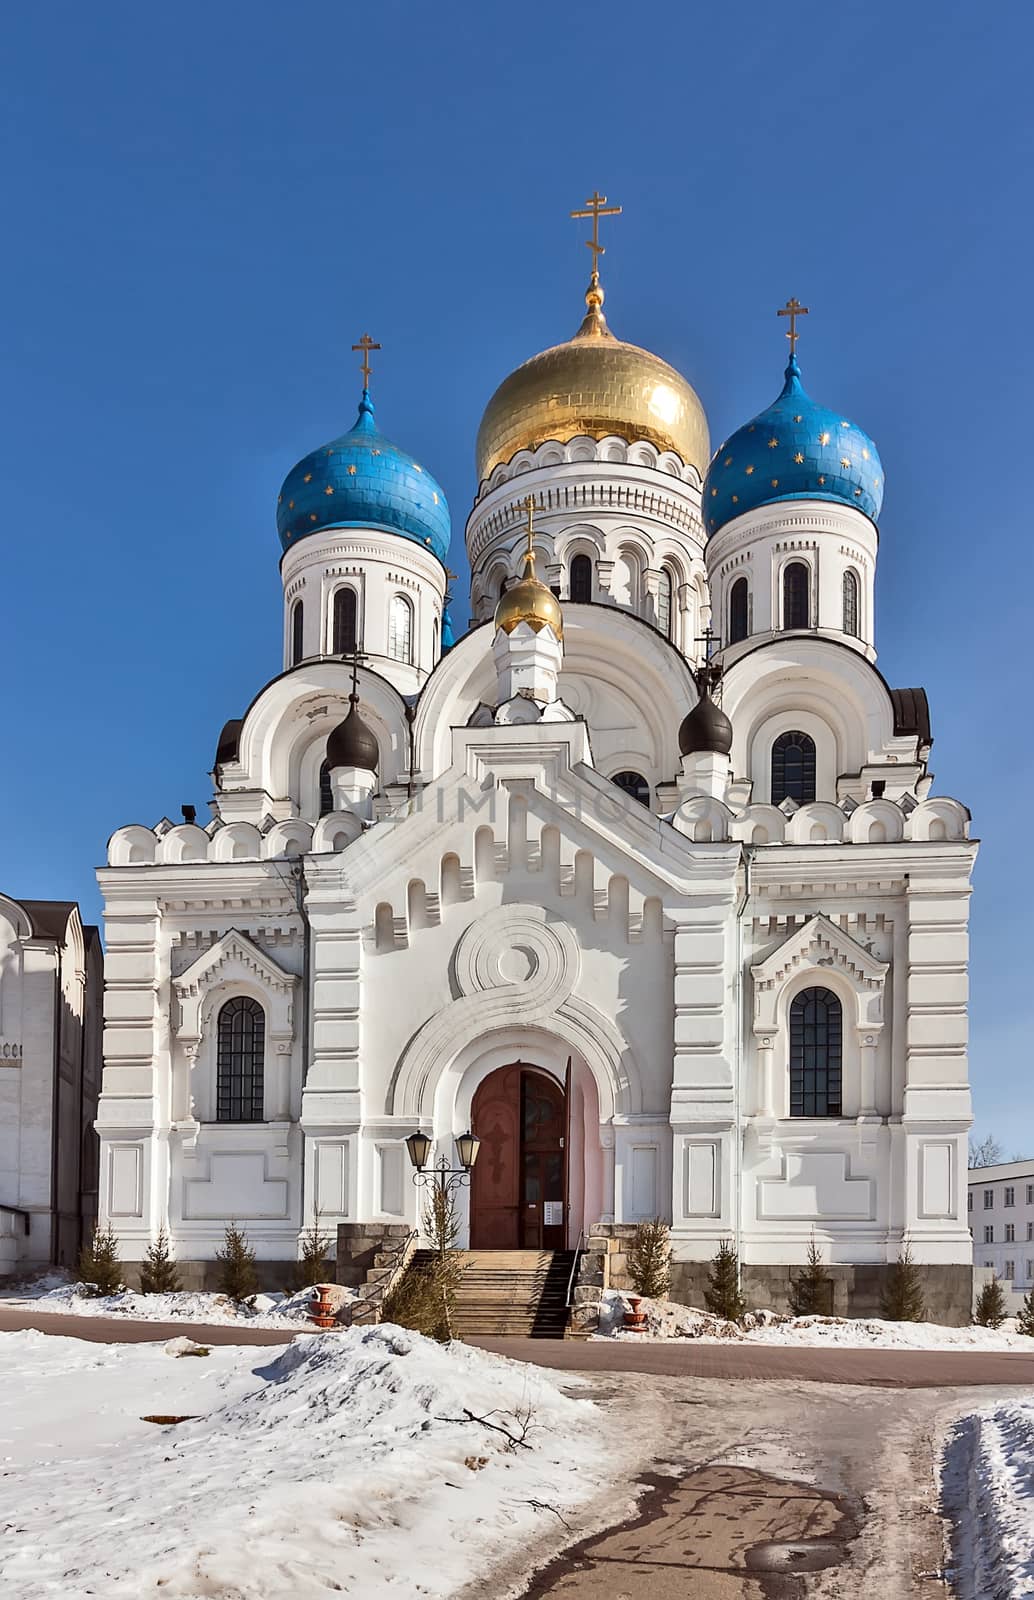 Transfiguration Cathedral. Nikolo-Ugreshsky Monastery  is Russian Orthodox monastery of St. Nicholas the Miracle-Worker located in a suburb of Moscow